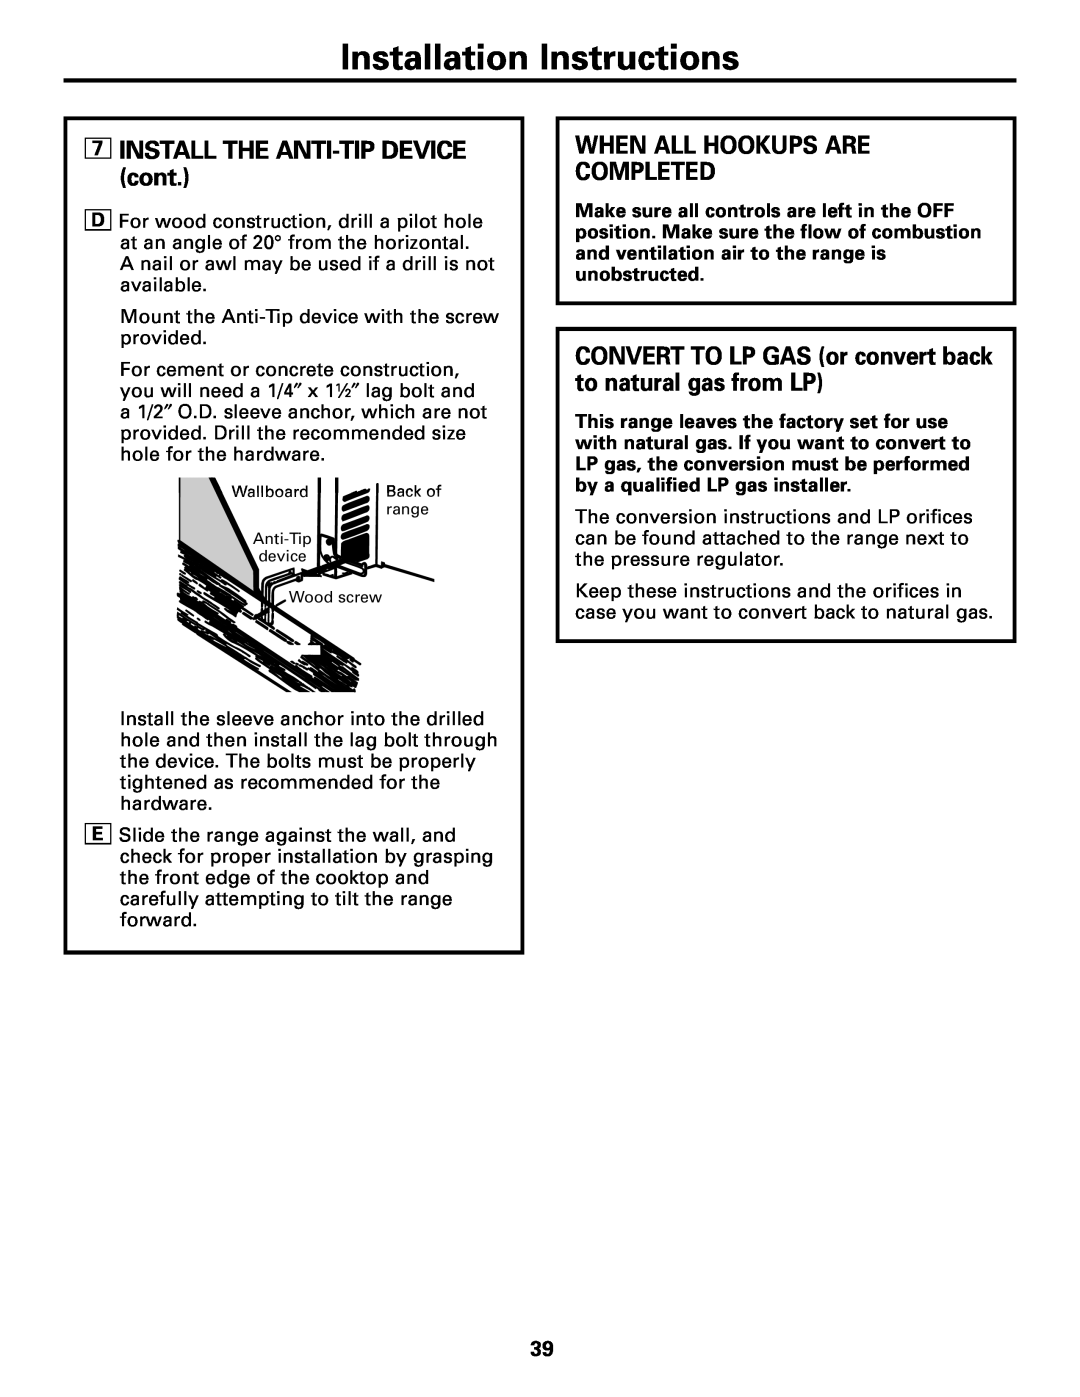 GE JGBC20 7INSTALL THE ANTI-TIPDEVICE cont, When All Hookups Are Completed, Installation Instructions 